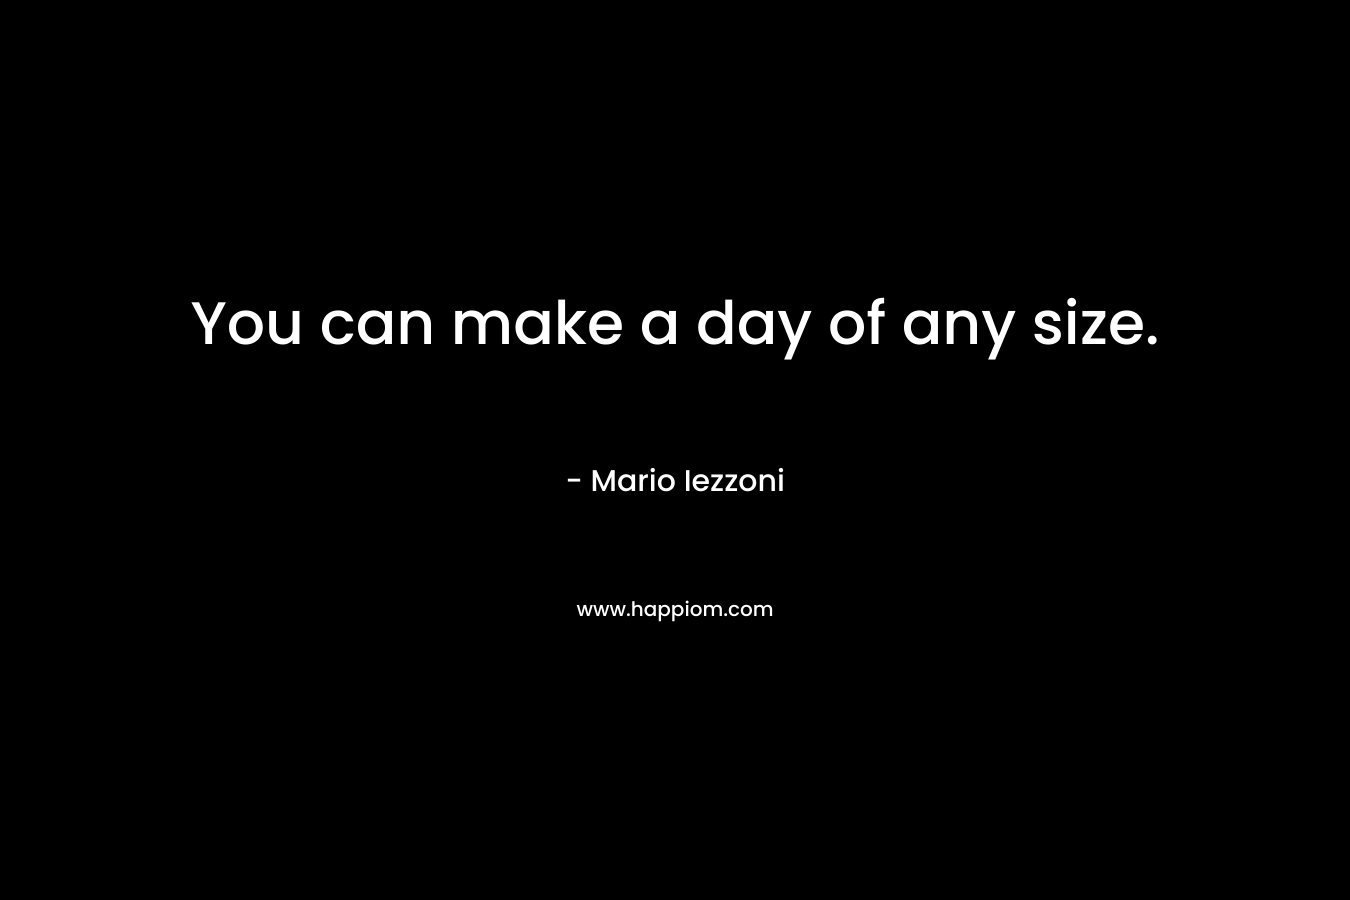 You can make a day of any size. – Mario Iezzoni